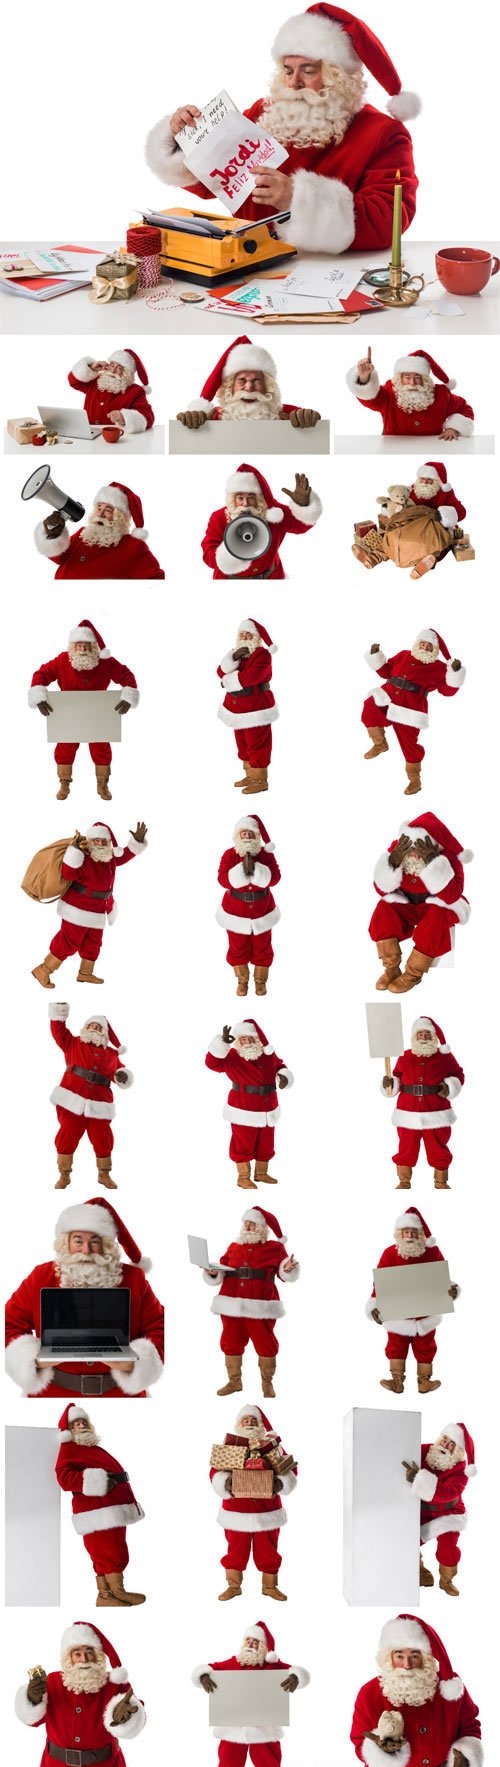 New Year and Christmas stock photos - 21